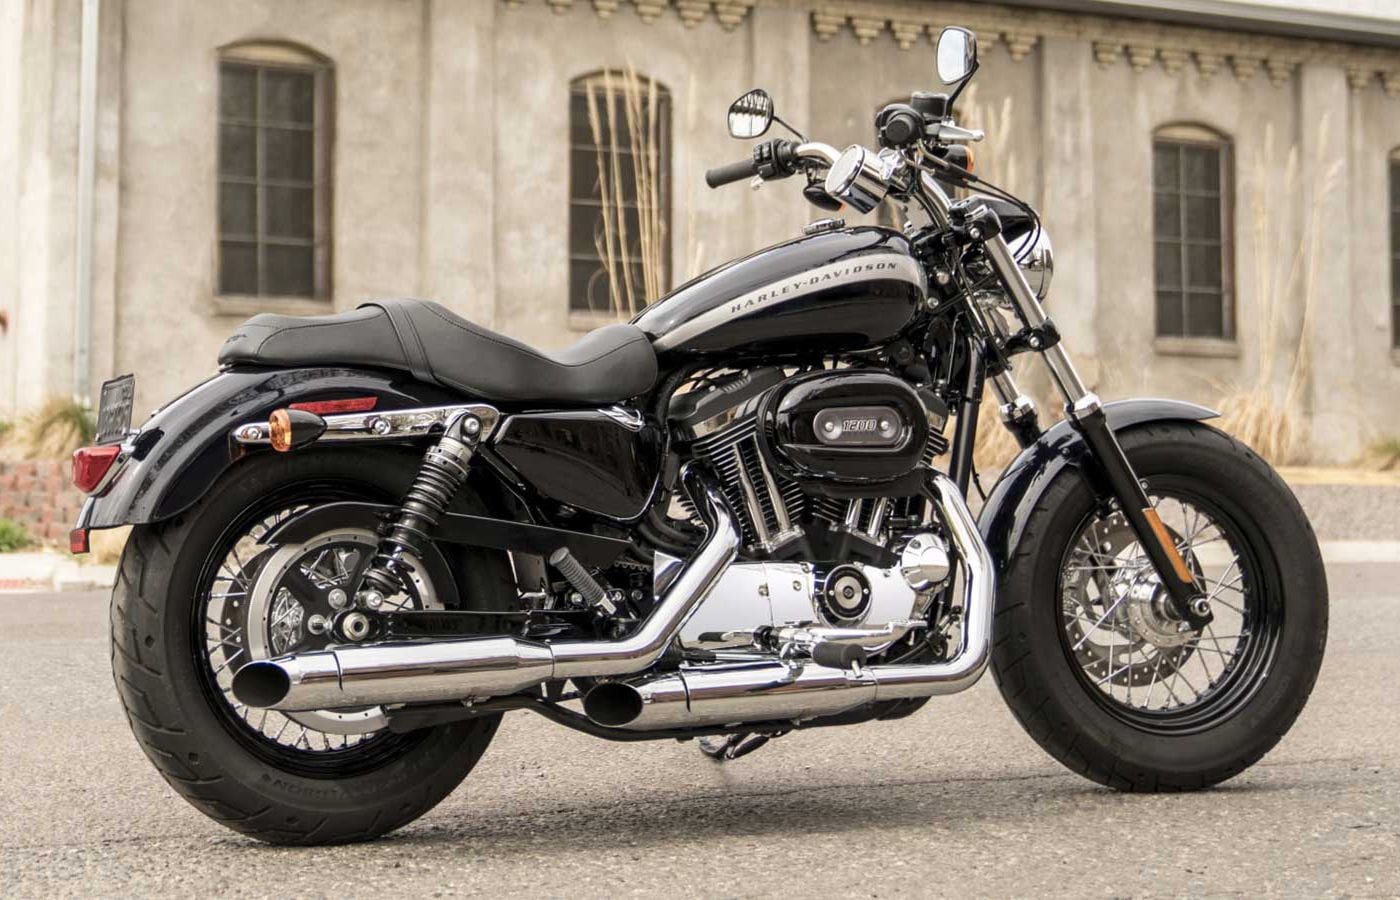 Harley Sportster 1200: Unleash the Road's Thrill!